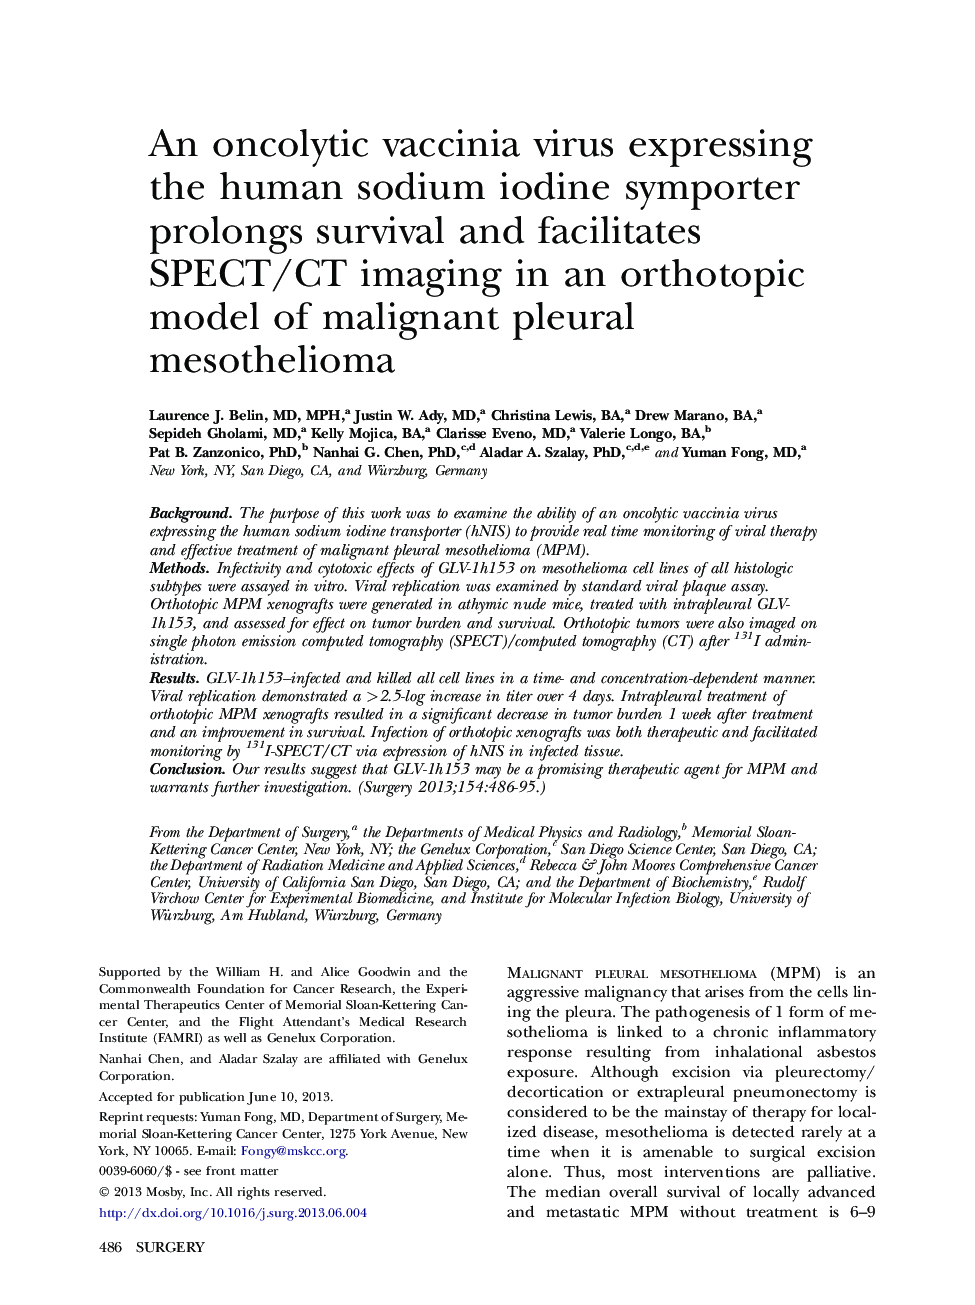 Society of University SurgeonsAn oncolytic vaccinia virus expressing the human sodium iodine symporter prolongs survival and facilitates SPECT/CT imaging in an orthotopic model of malignant pleural mesothelioma